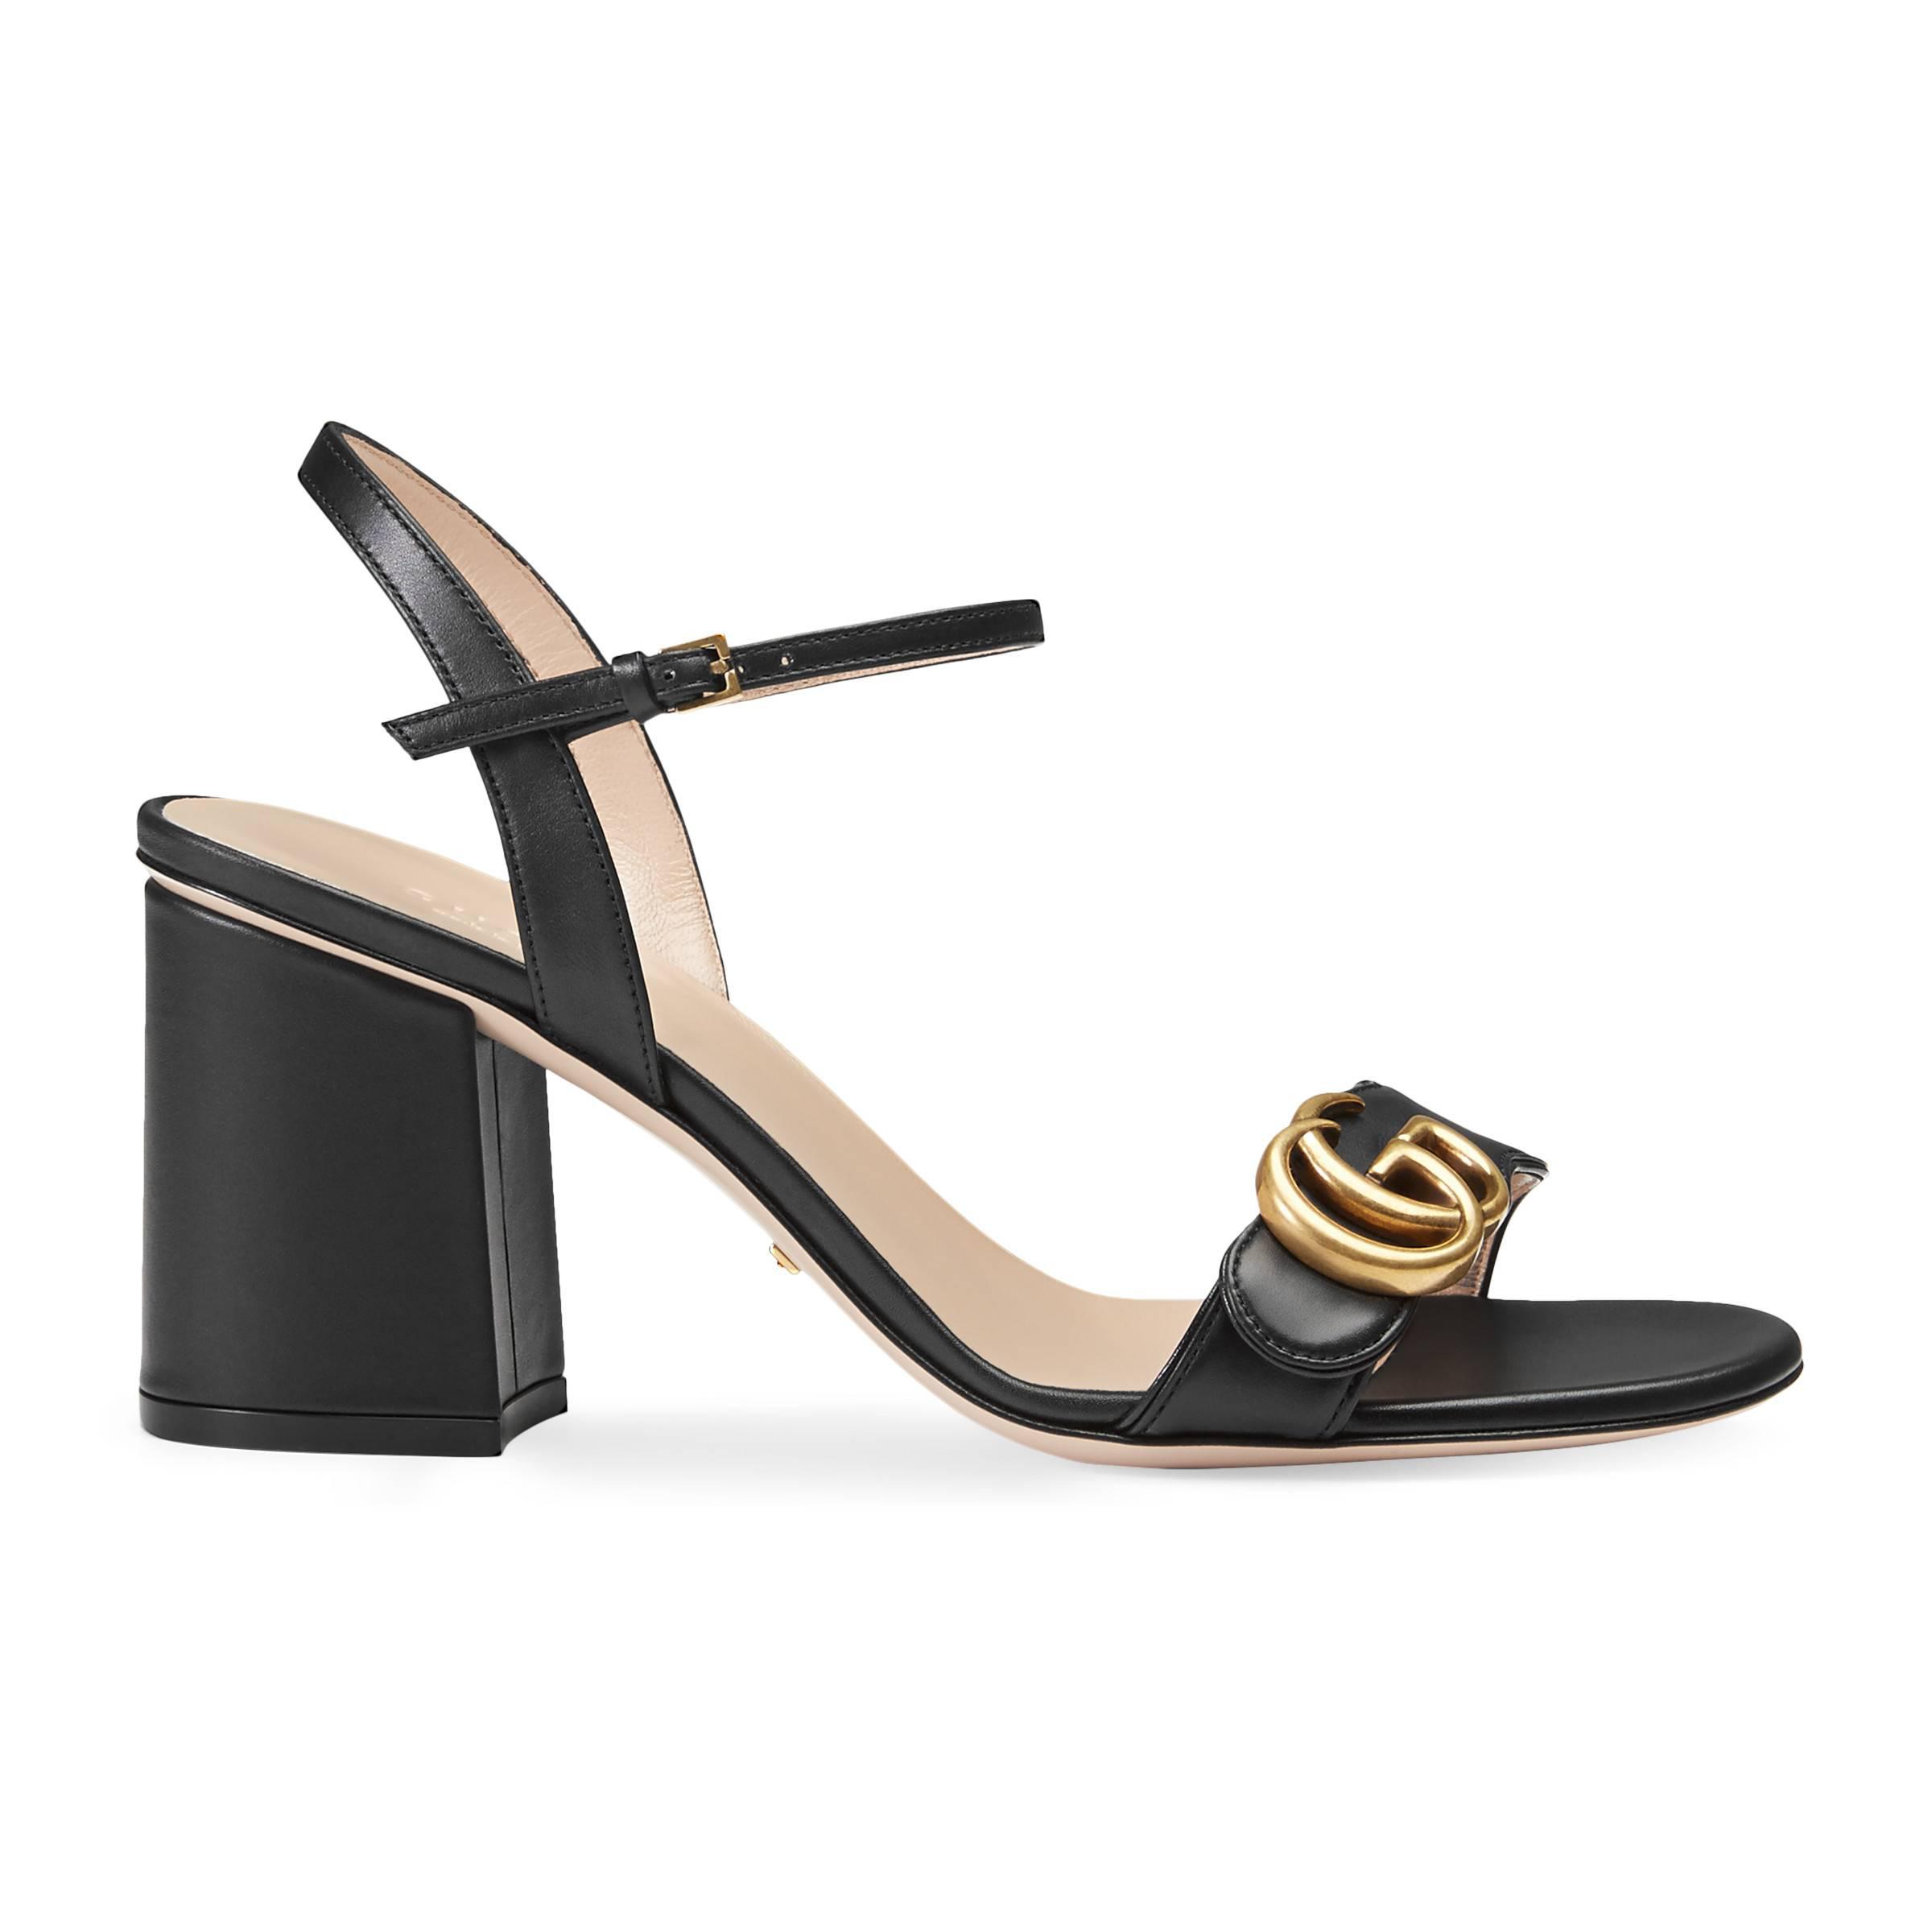 Gucci GG Marmont Block-heel Sandals in Black - Save 18% - Lyst